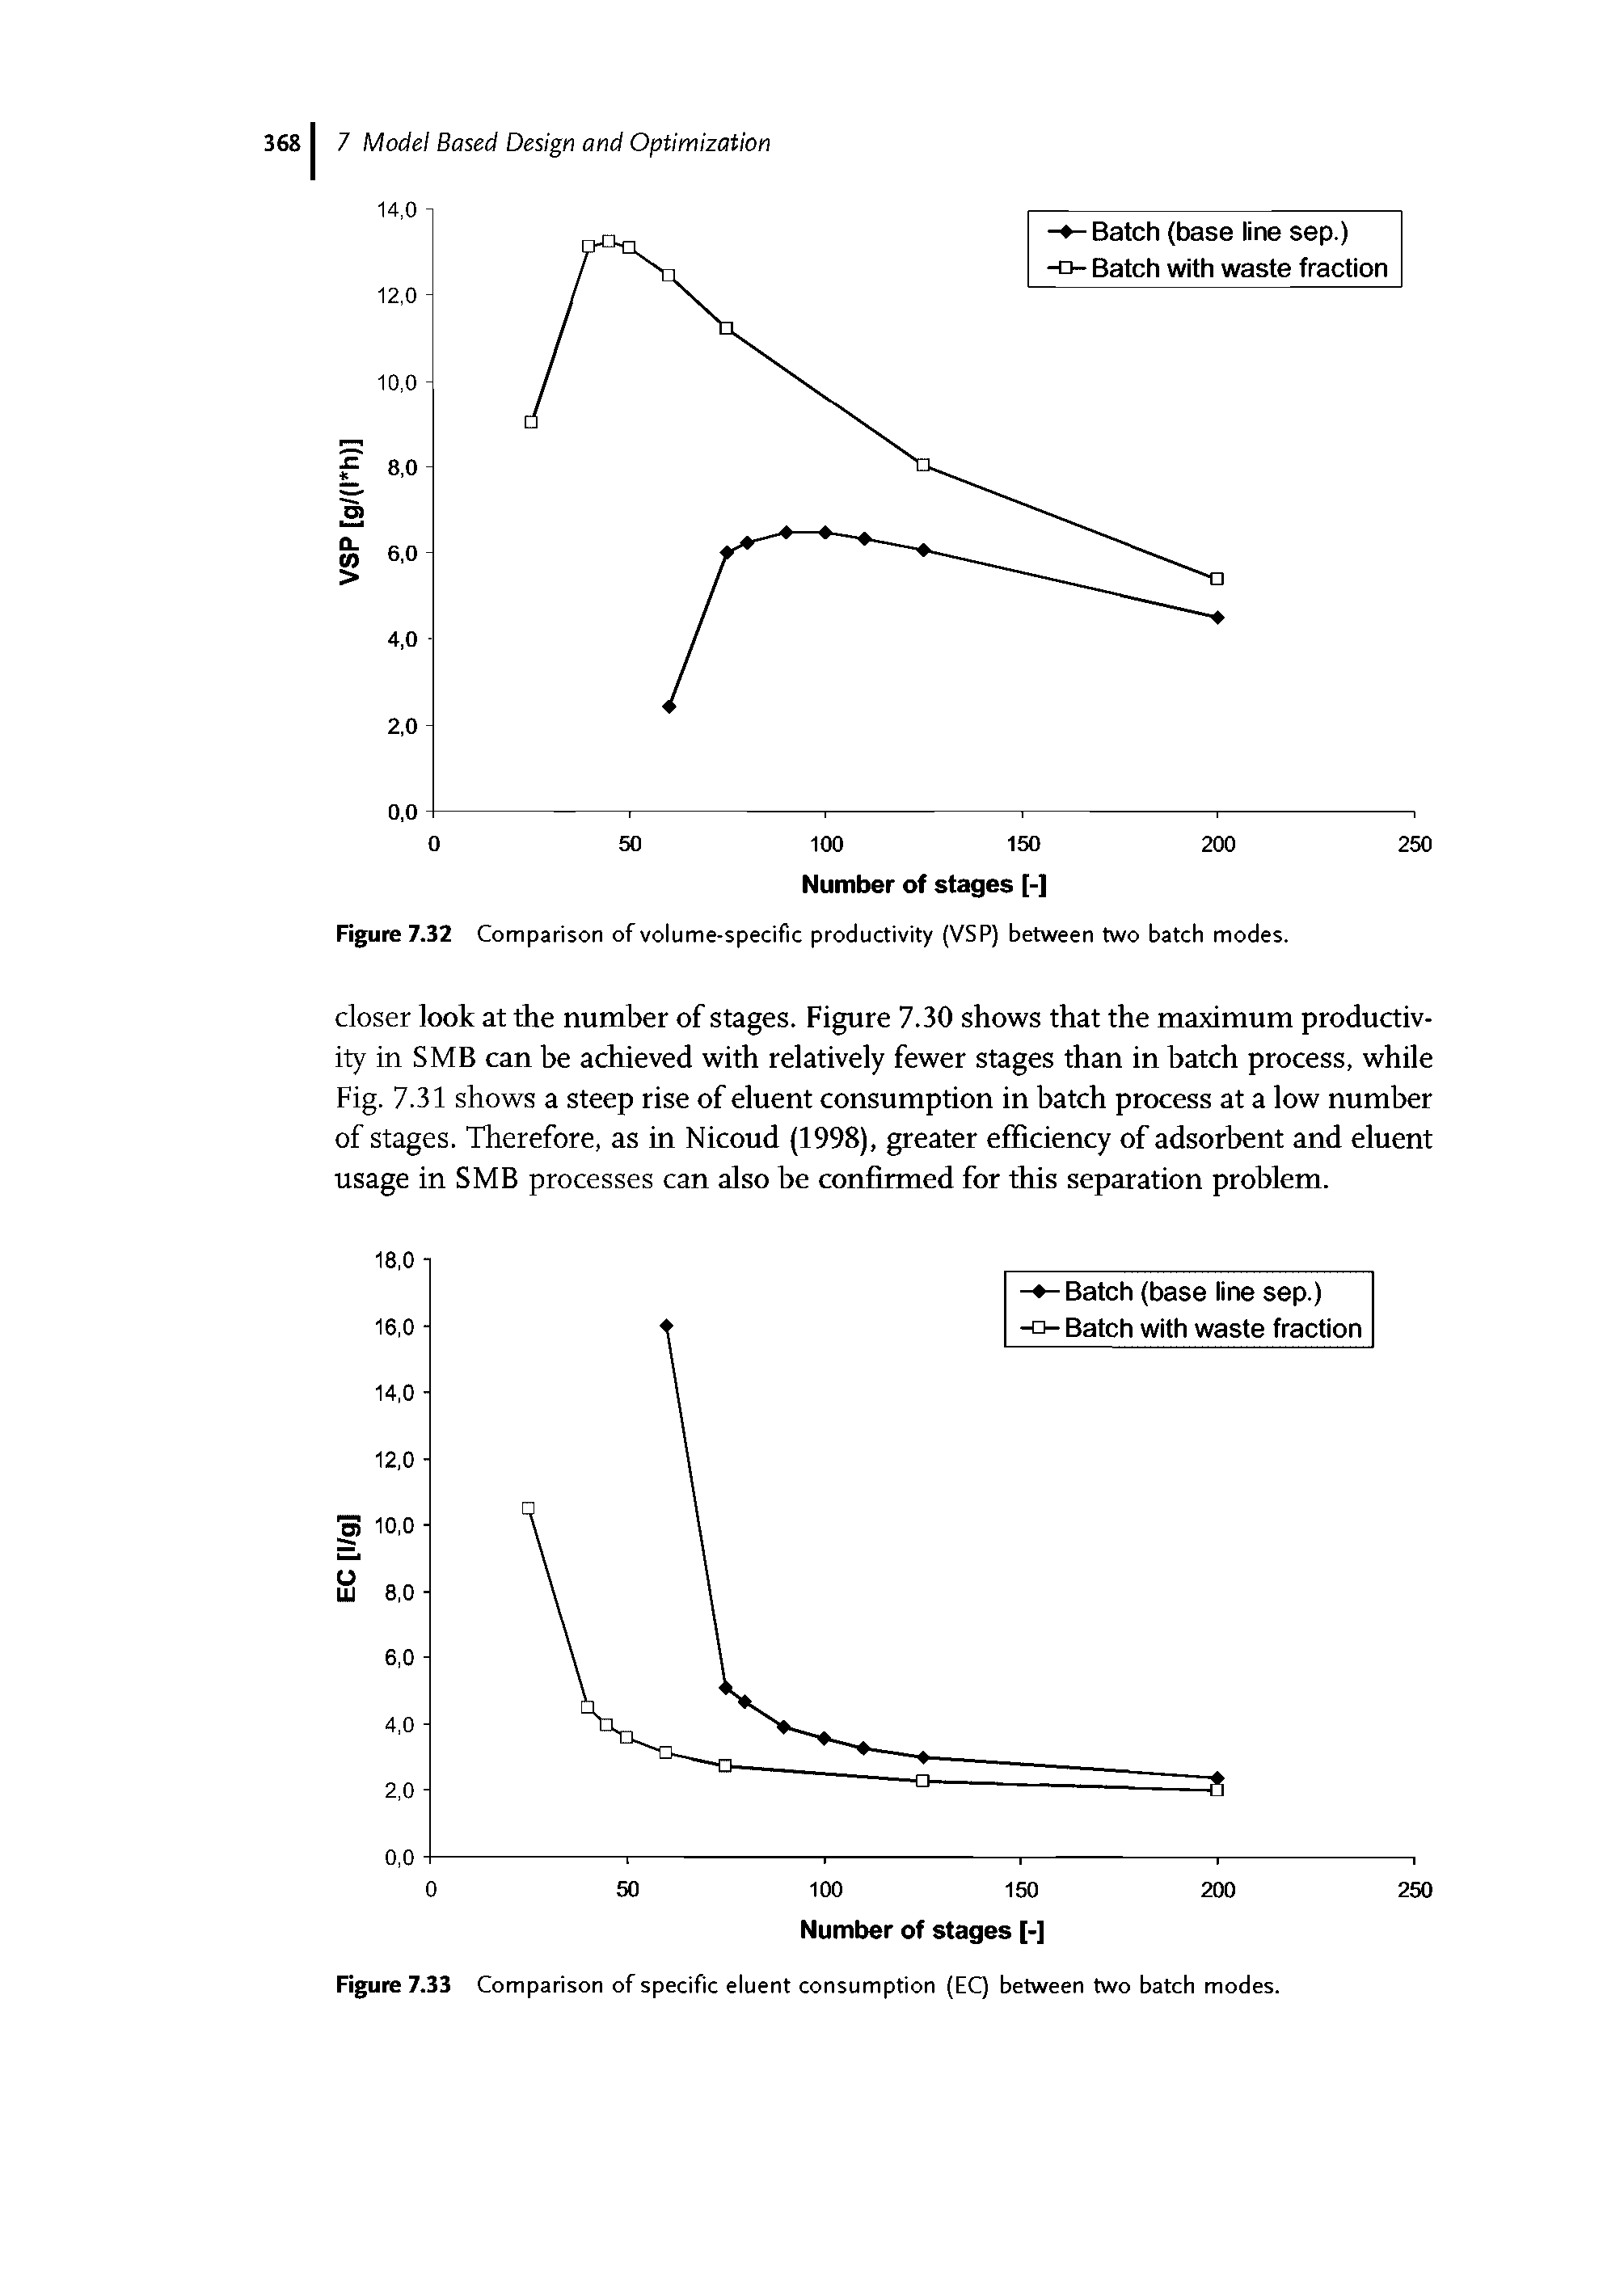 Figure 7.32 Comparison of volume-specific productivity (VSP) between two batch modes.